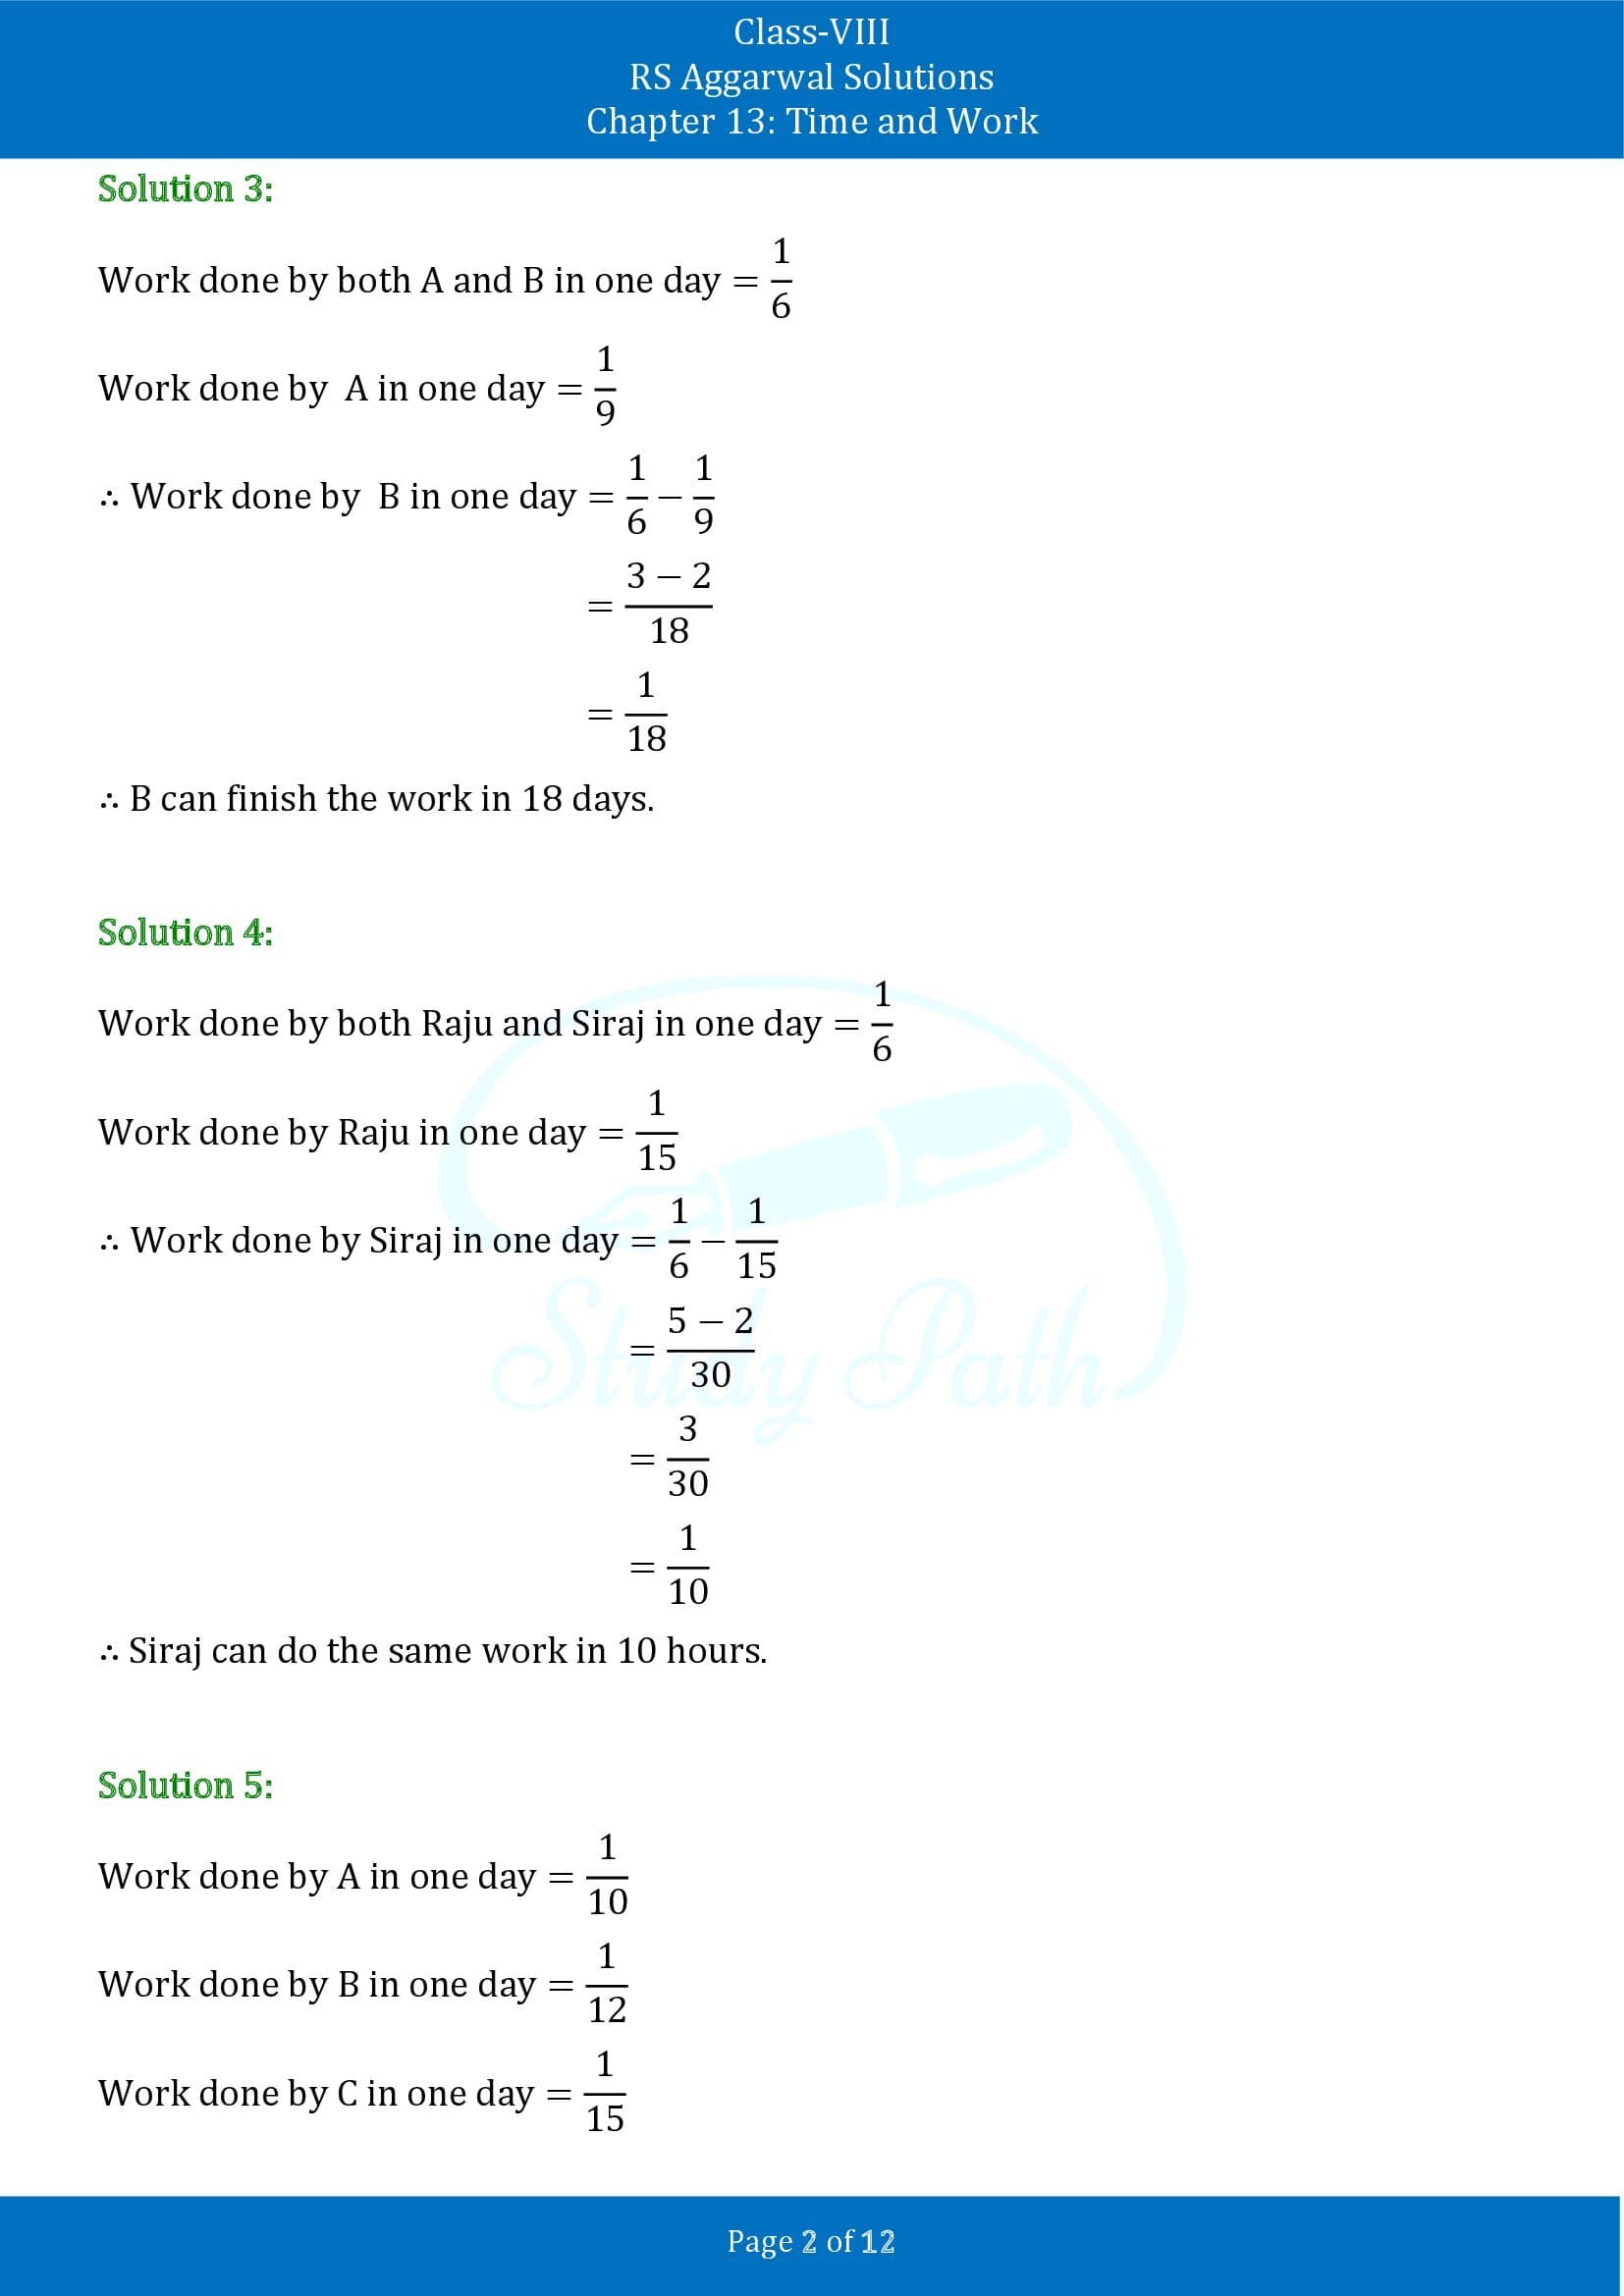 RS Aggarwal Solutions Class 8 Chapter 13 Time and Work Exercise 13A 00002